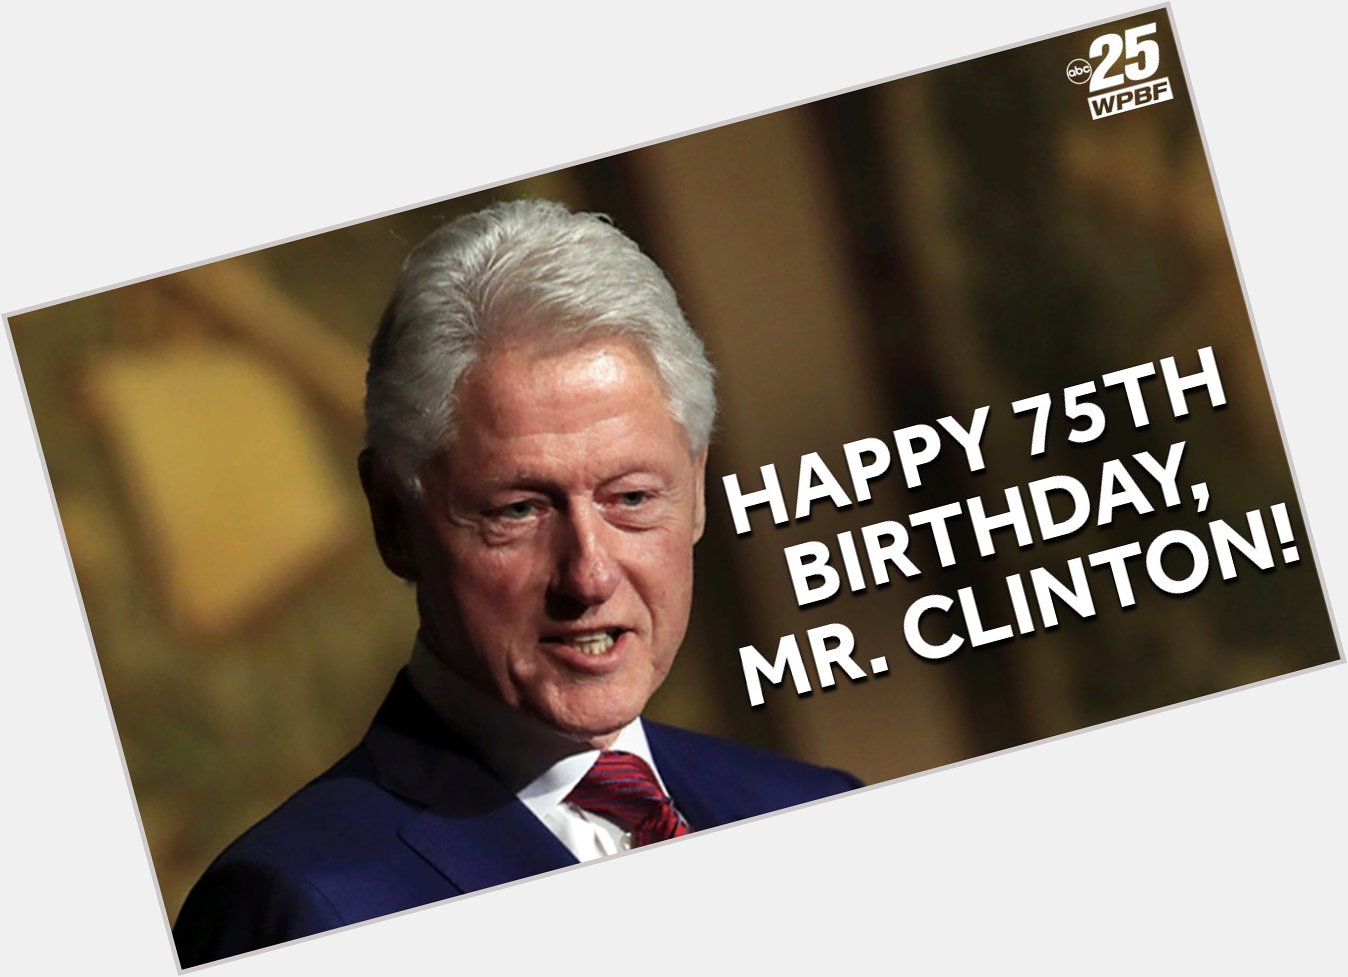  HAPPY BIRTHDAY! Former President Bill Clinton turns 75 today! Wish him with us! 